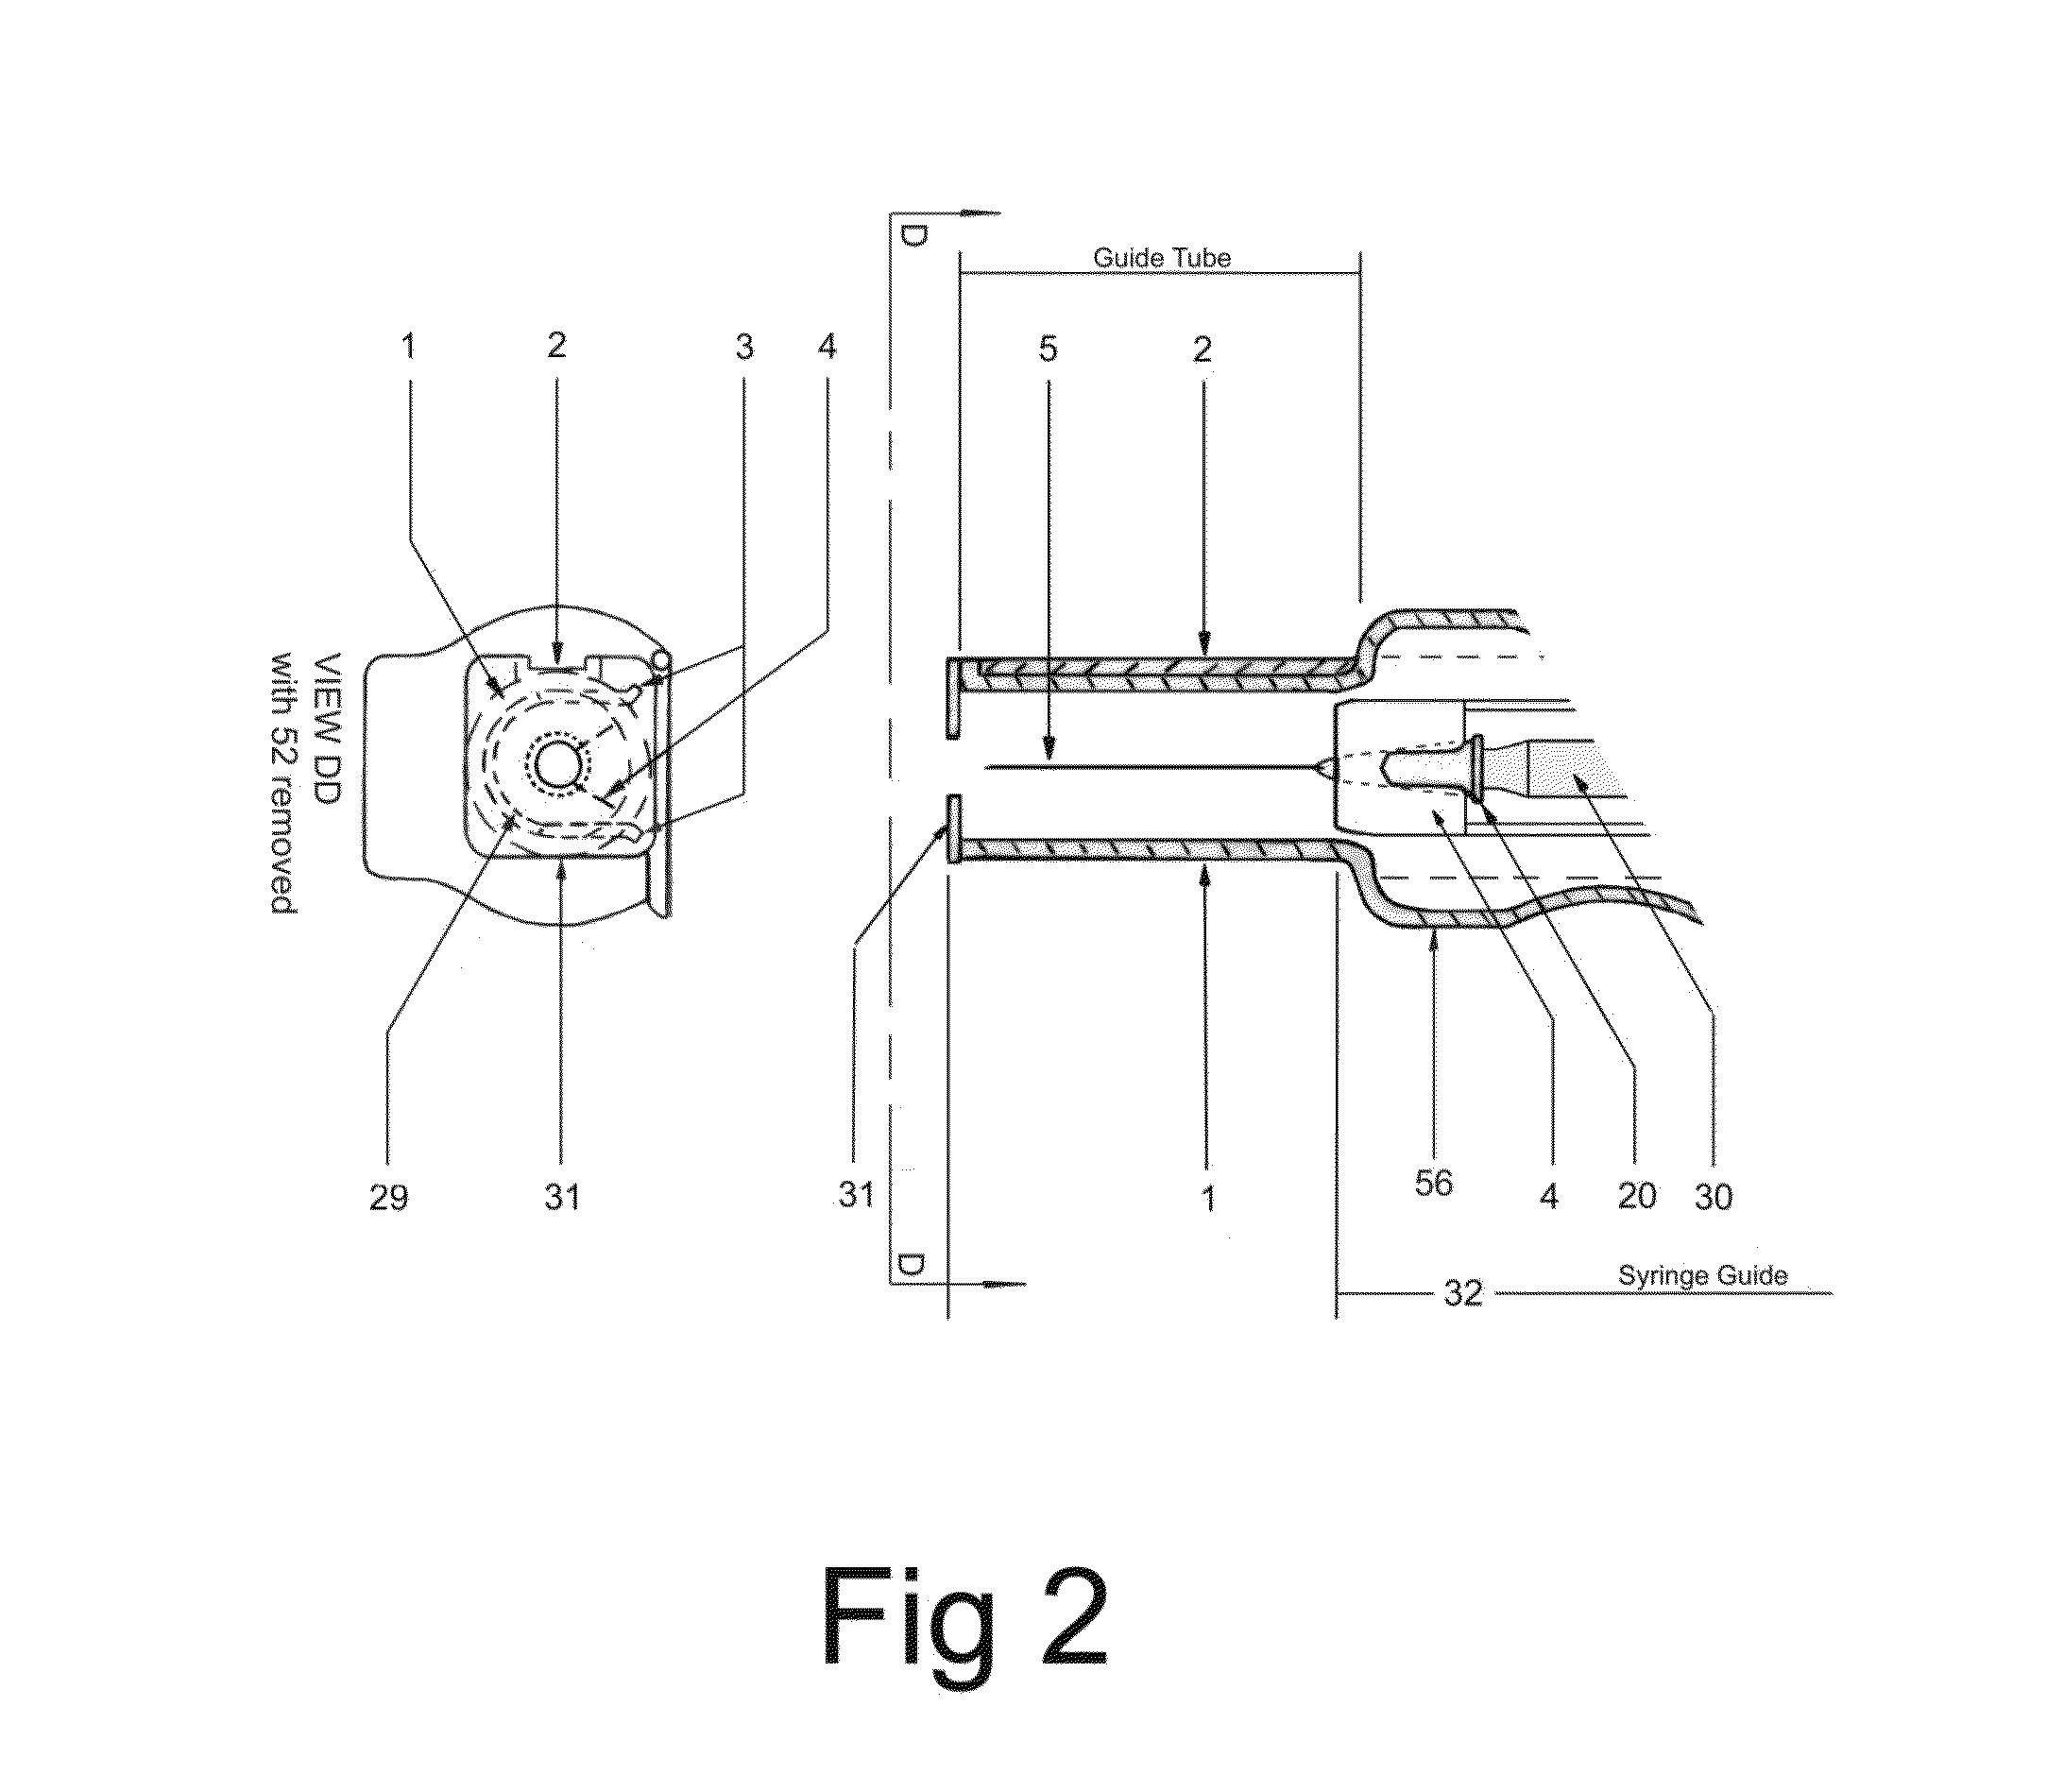 Electromechanical Manipulating Device for Medical Needle and Syringe with Sensory Biofeedback and Pain Suppression Capability